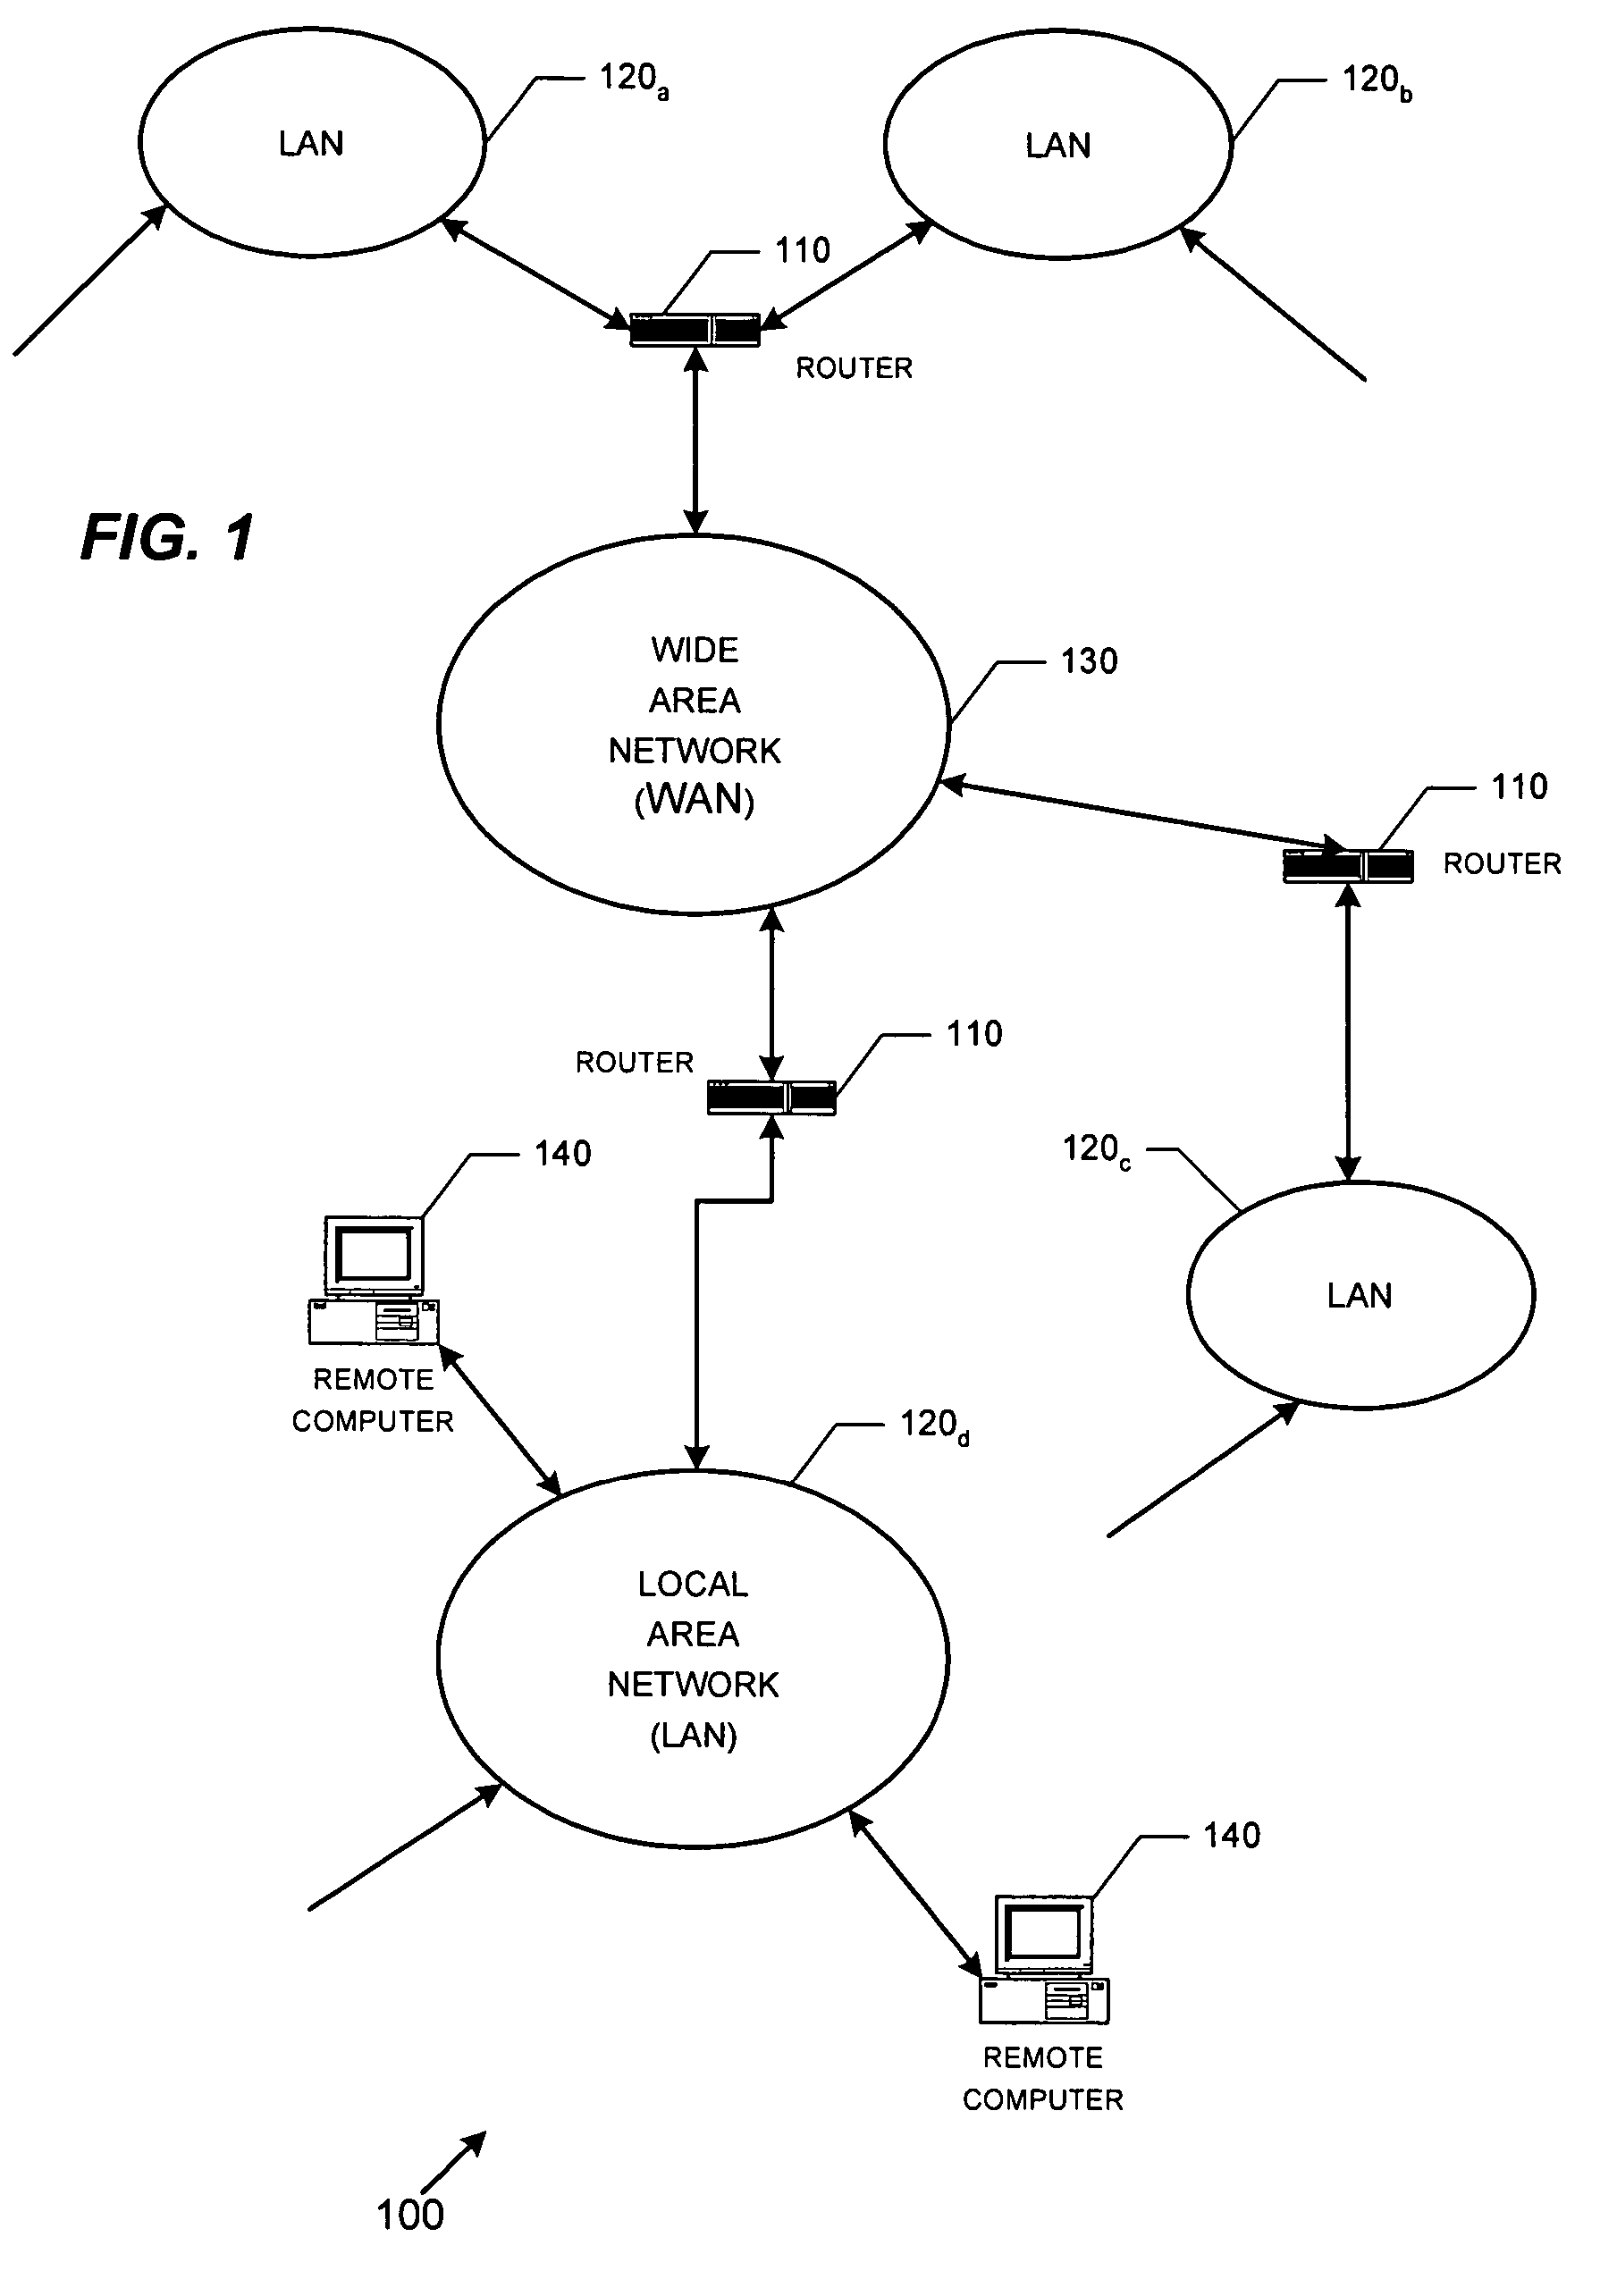 Method and system for image verification to prevent messaging abuse